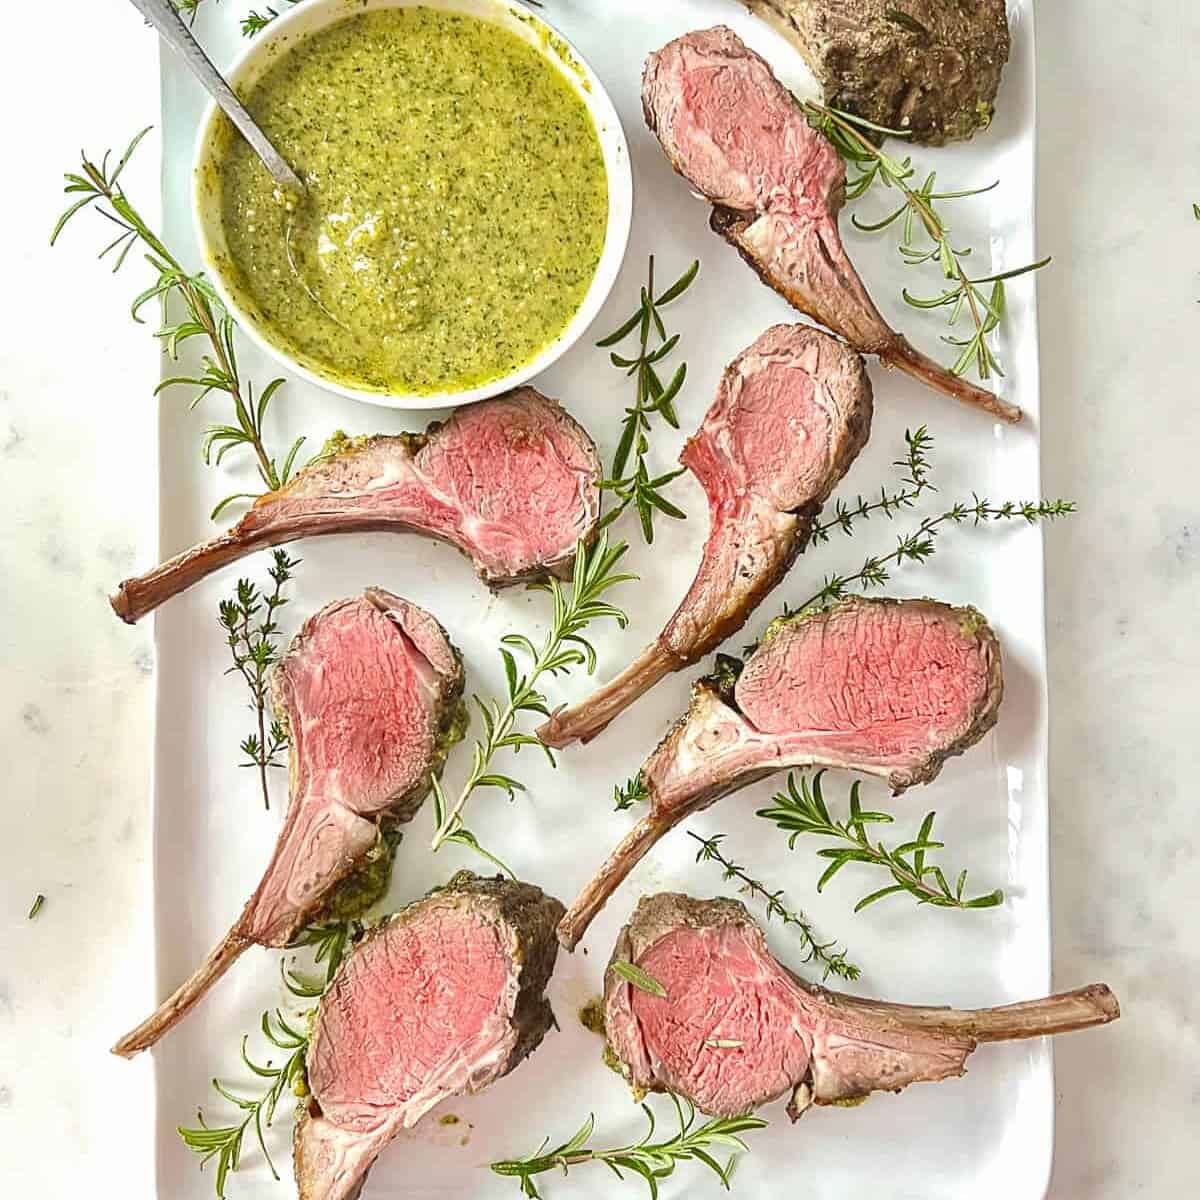 grilled rack of lamb, sliced and served on a platter with a mint pesto